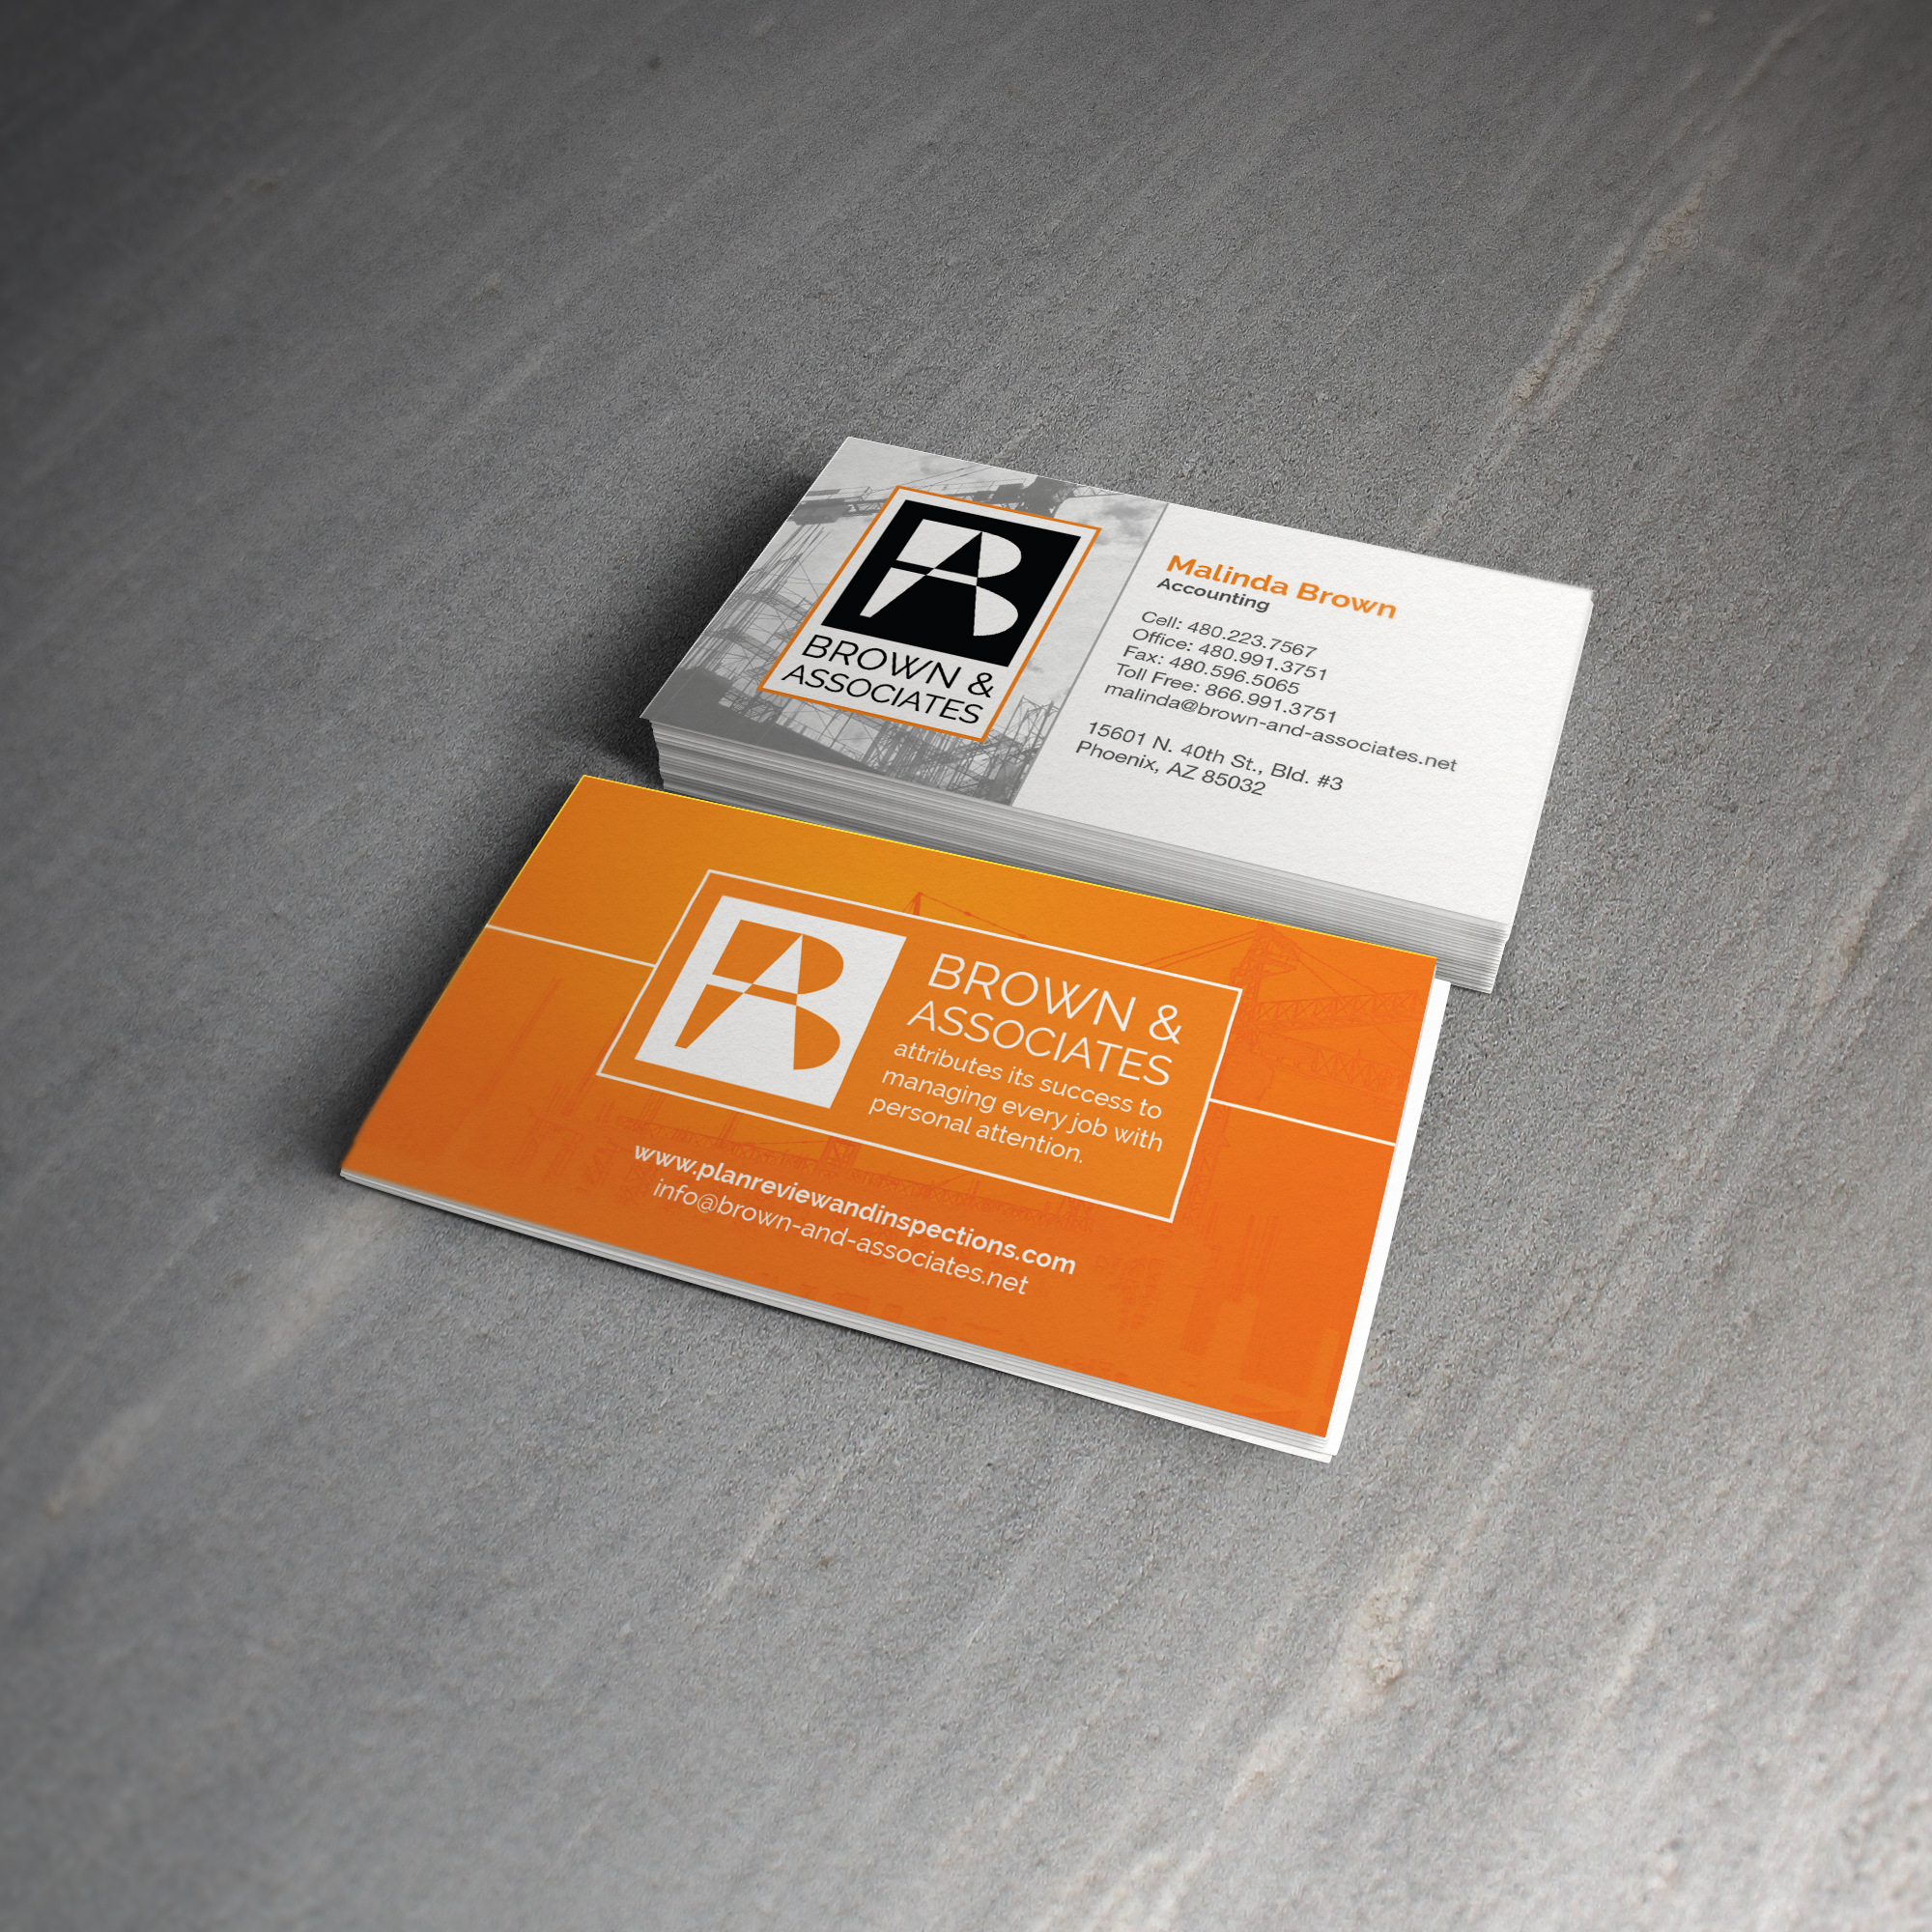 The client's business card after redesign